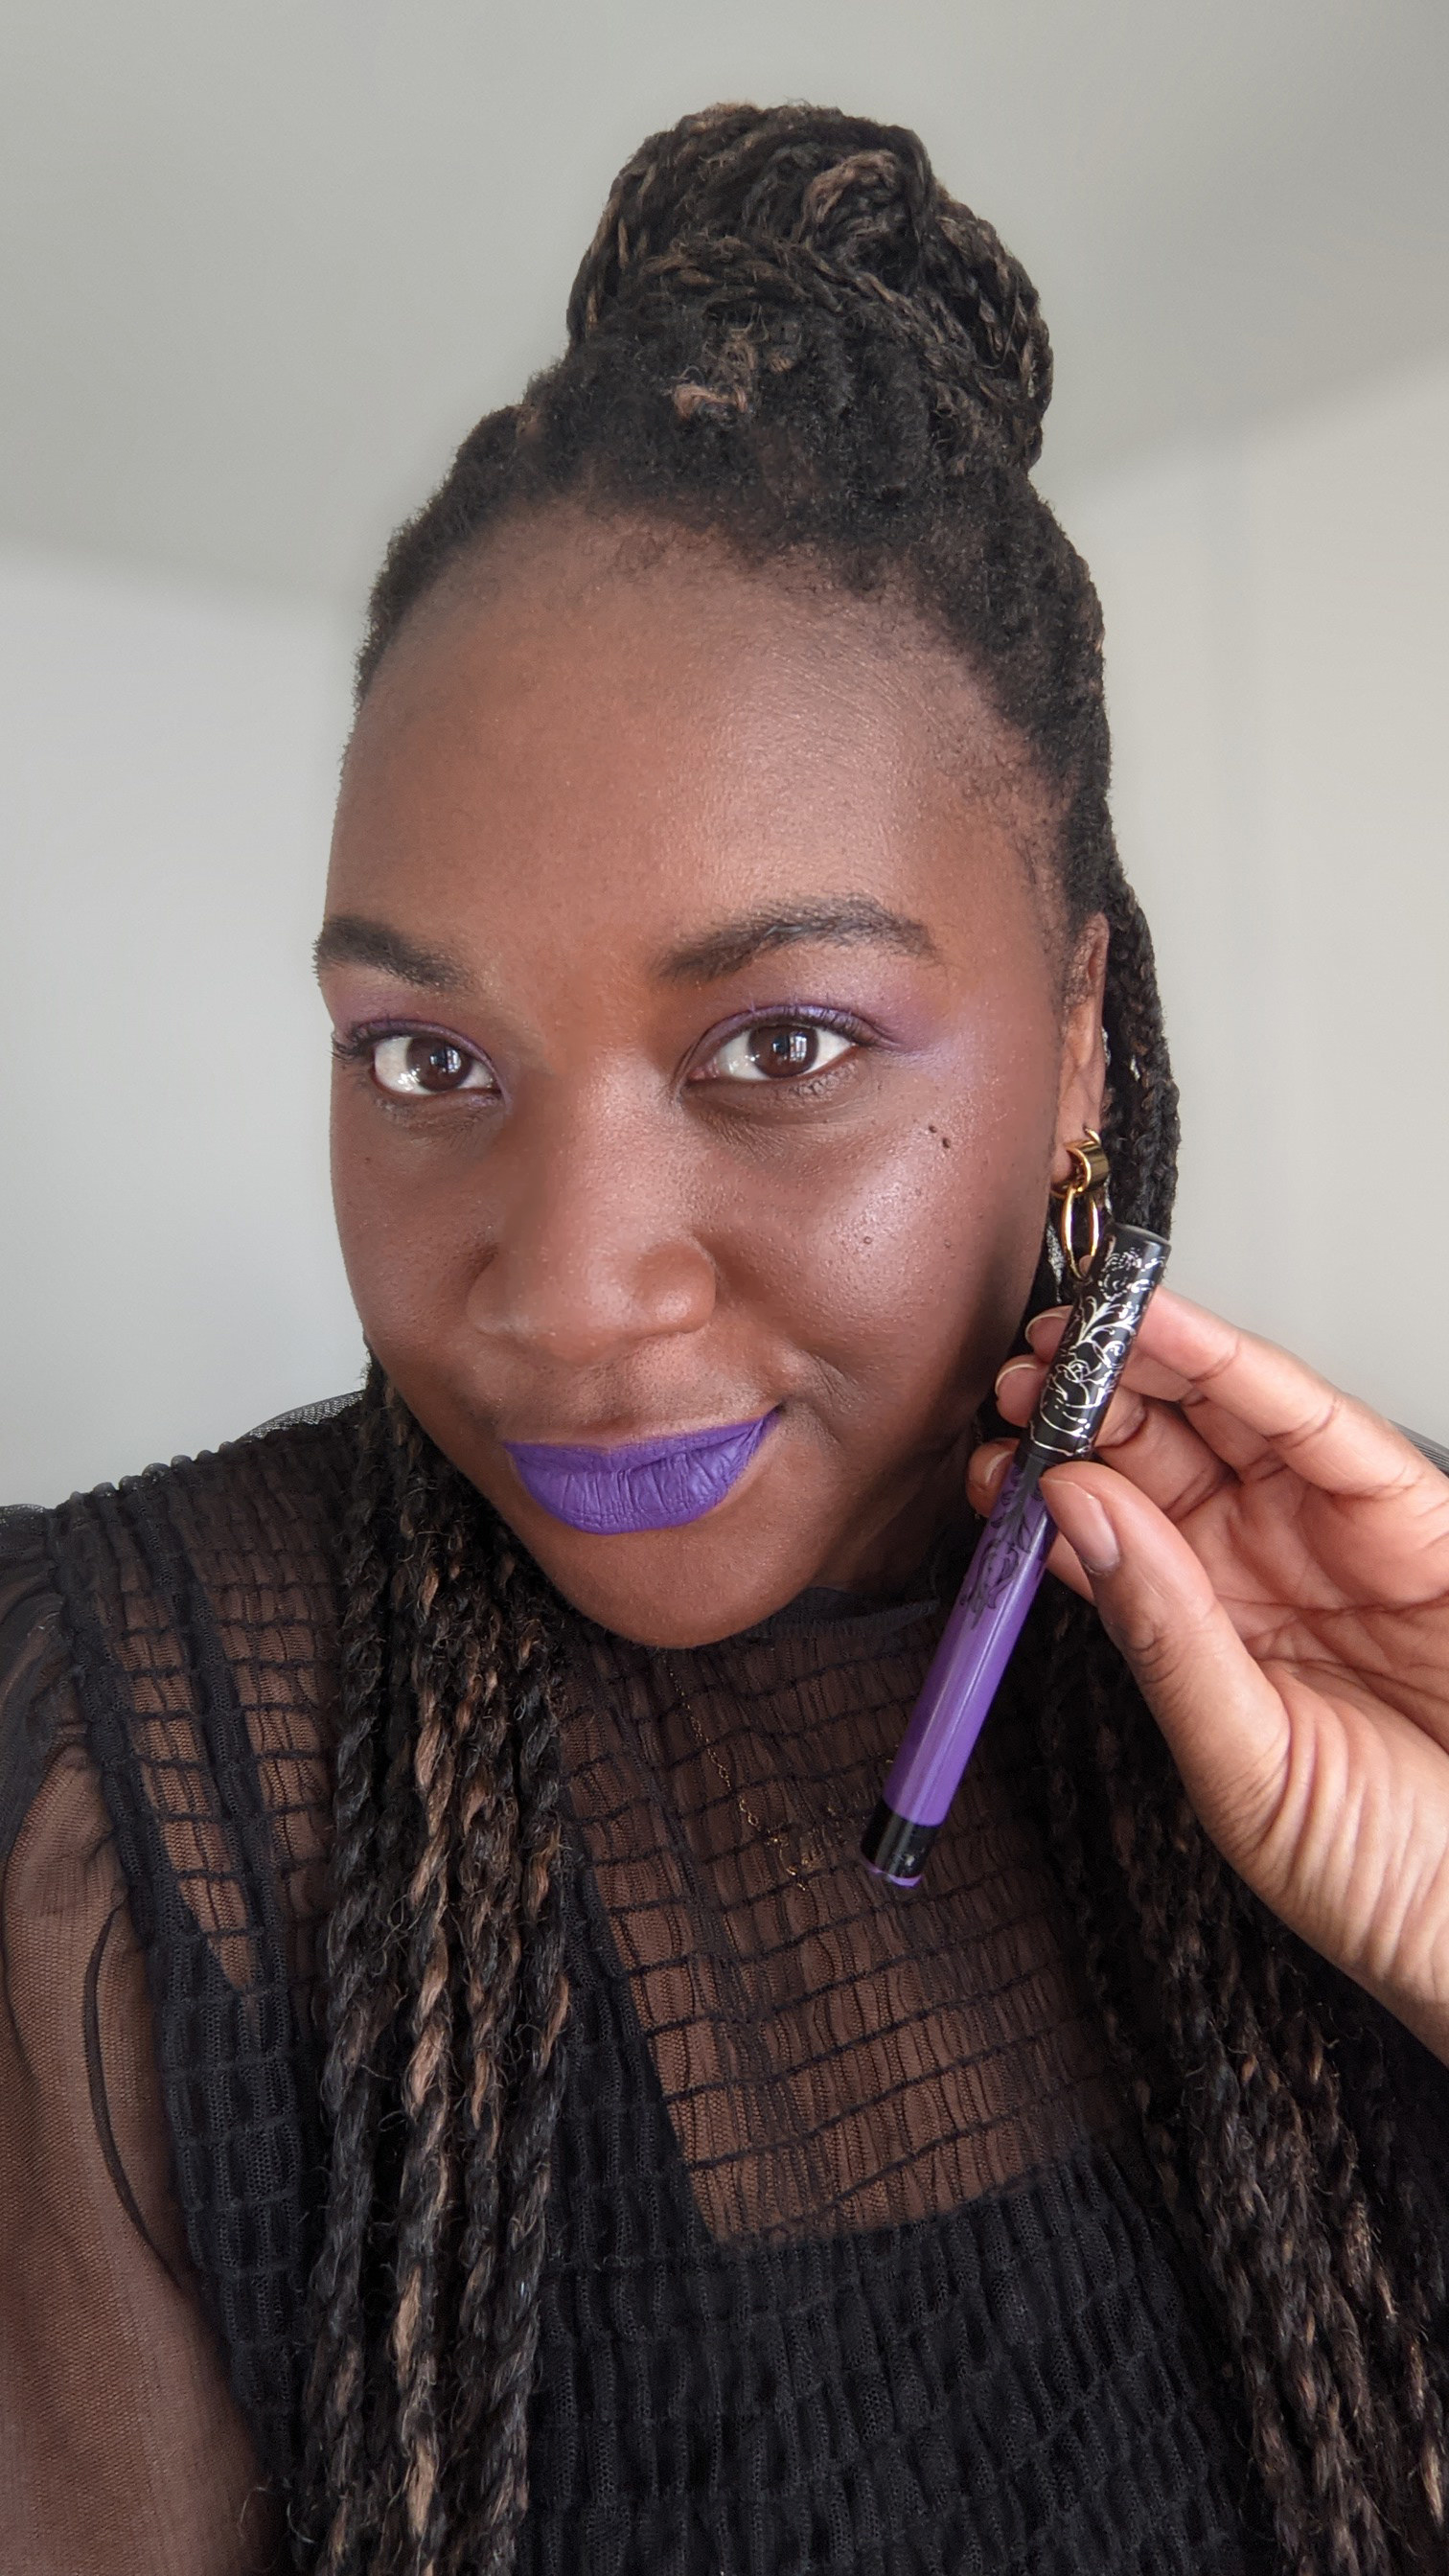 A person wearing bright lipstick and holding a tube of liquid lipstick in their hand